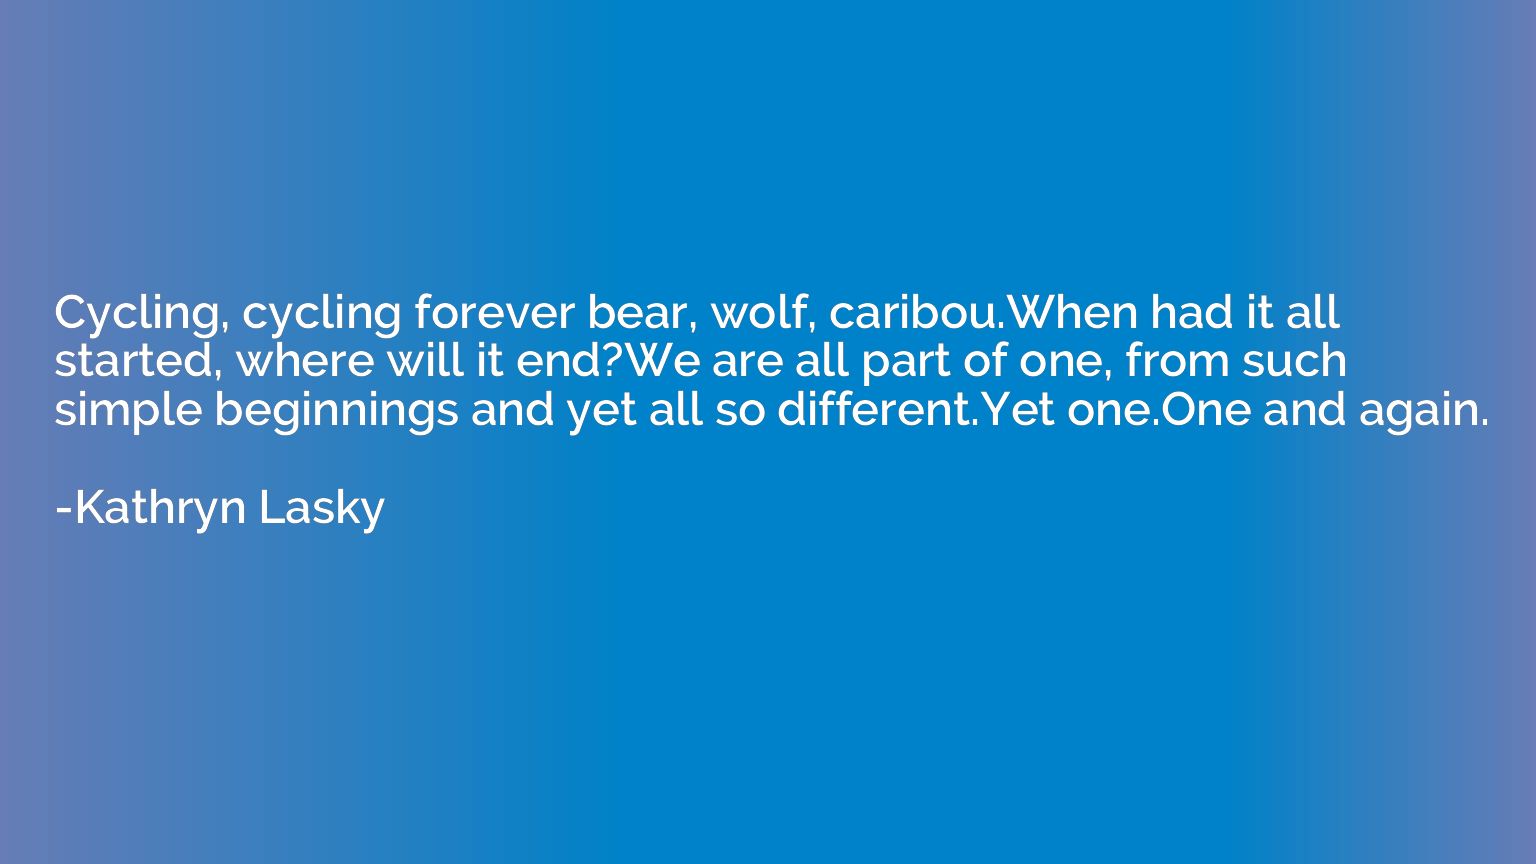 Cycling, cycling forever bear, wolf, caribou.When had it all